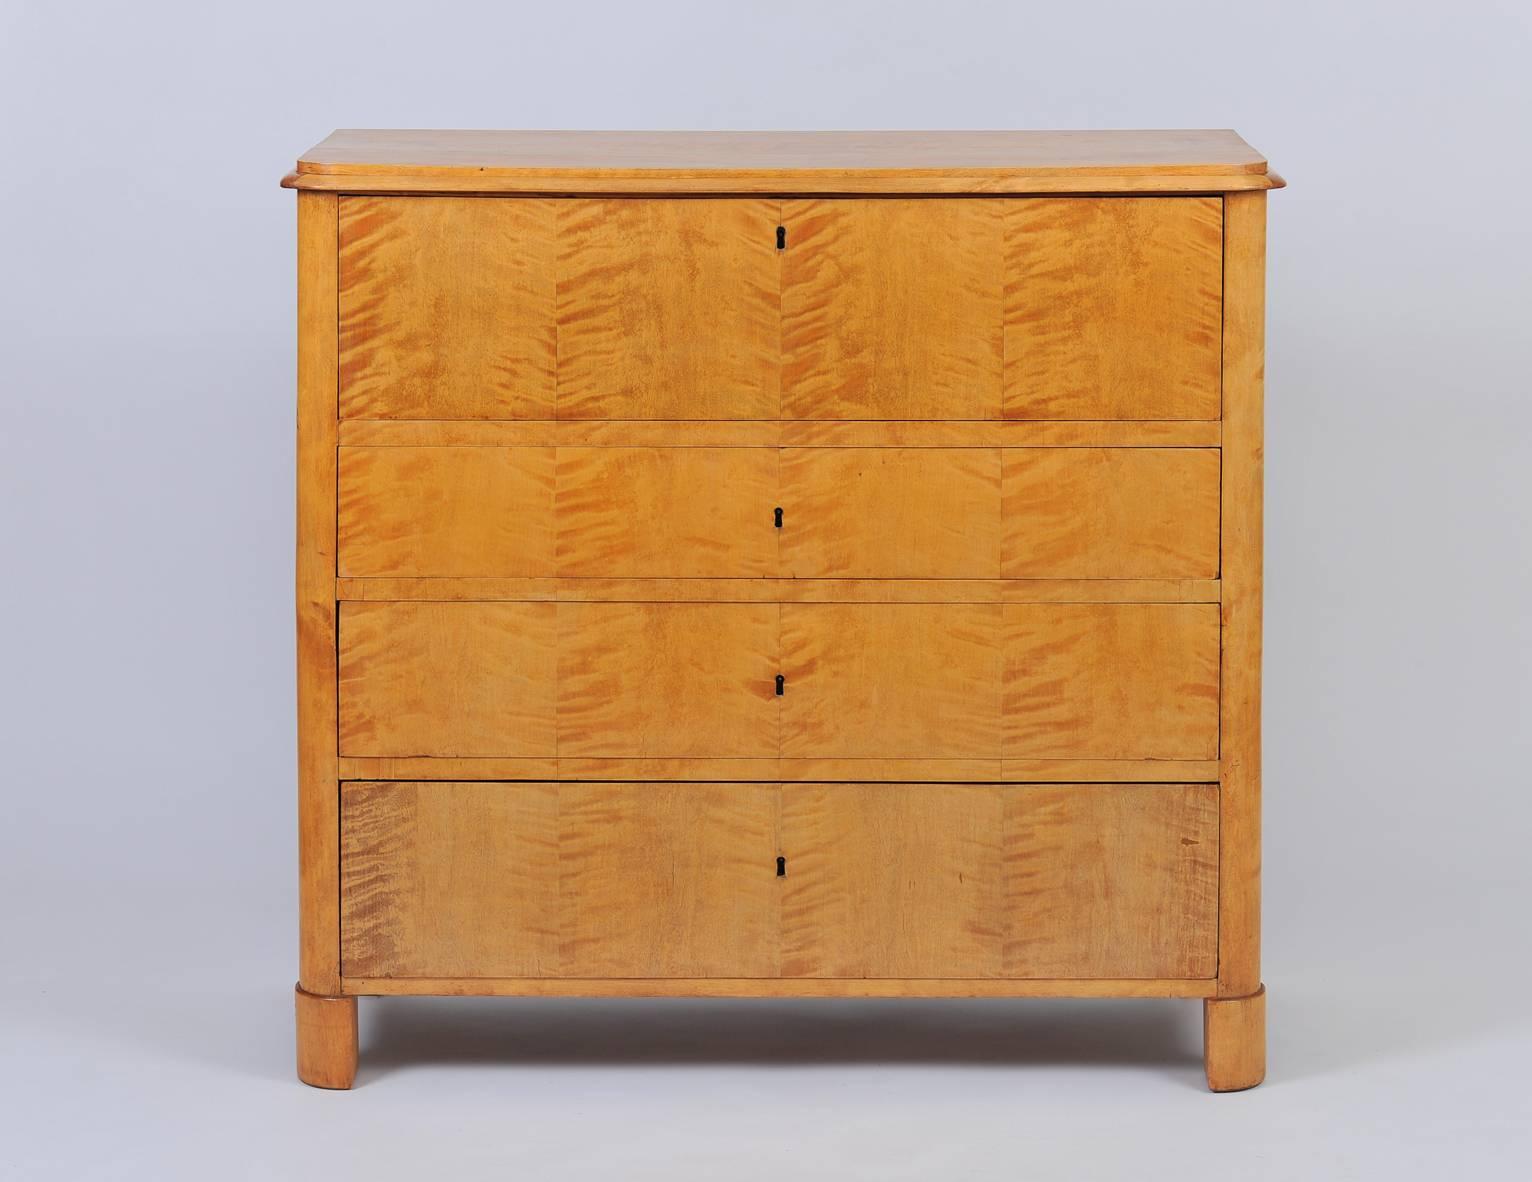 A Biedermeier birch veneered chest of drawers, the top drawer revealing a secretaire, fully fitted with 14 drawers adorned with bone knobs
Sweden, circa 1840.